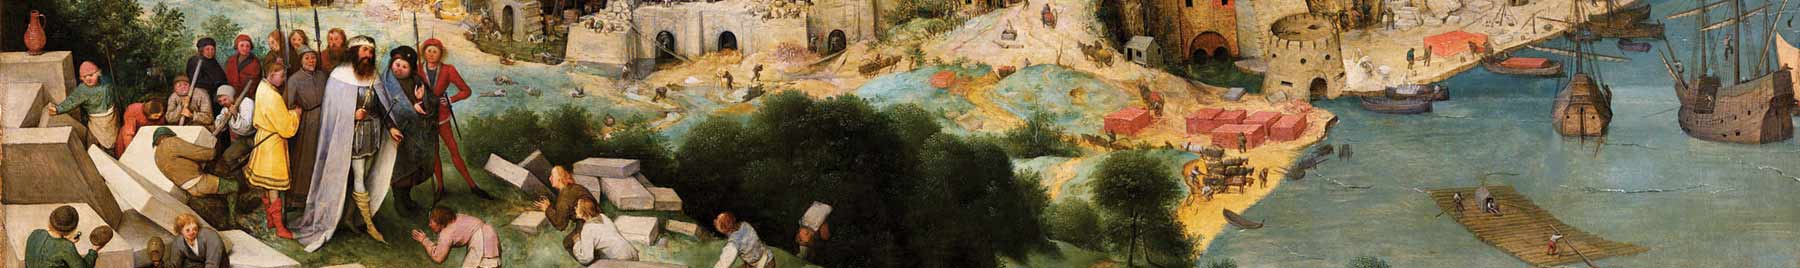 Detail from Construction of the Tower of Babel by Pieter Bruegel the Elder, 1563